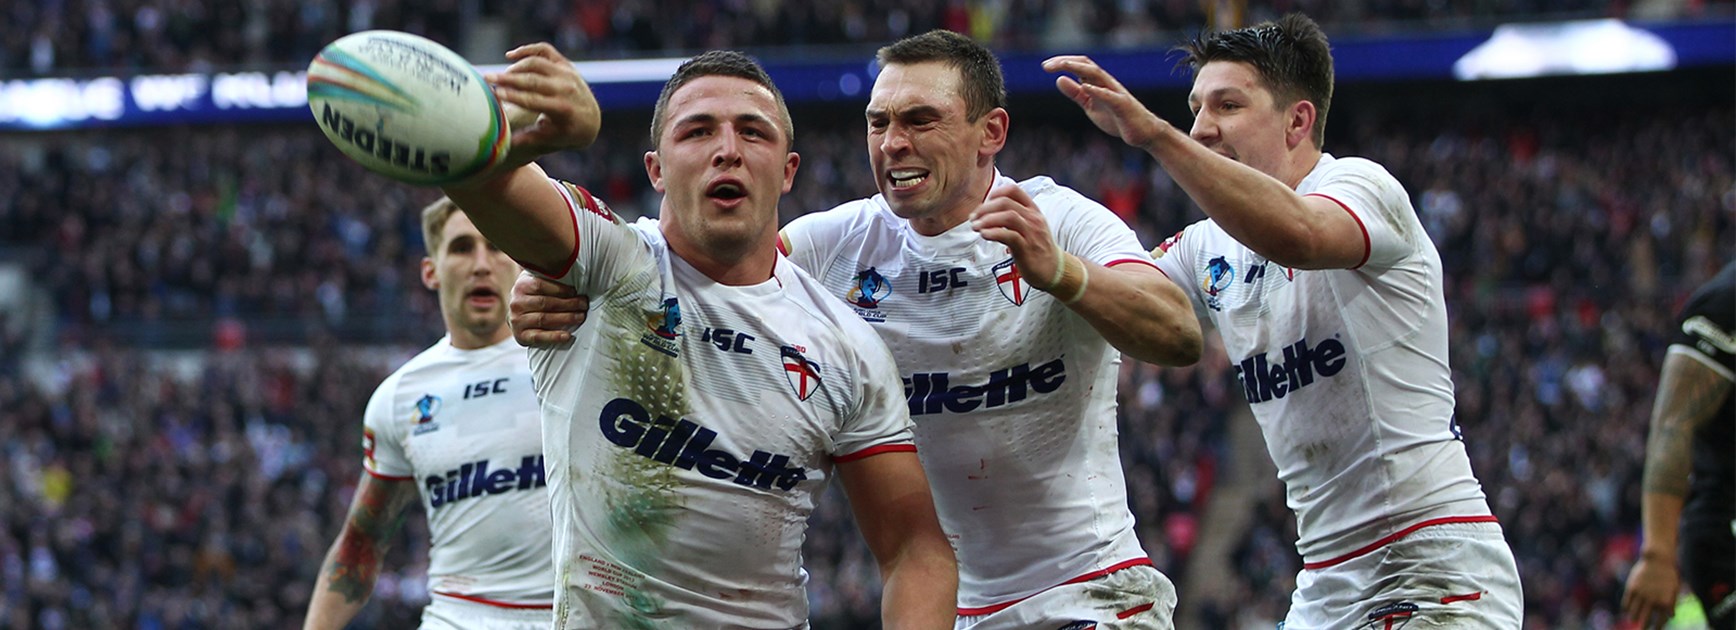 Sam Burgess celebrates a try for England in the 2013 World Cup semi-final against New Zealand.